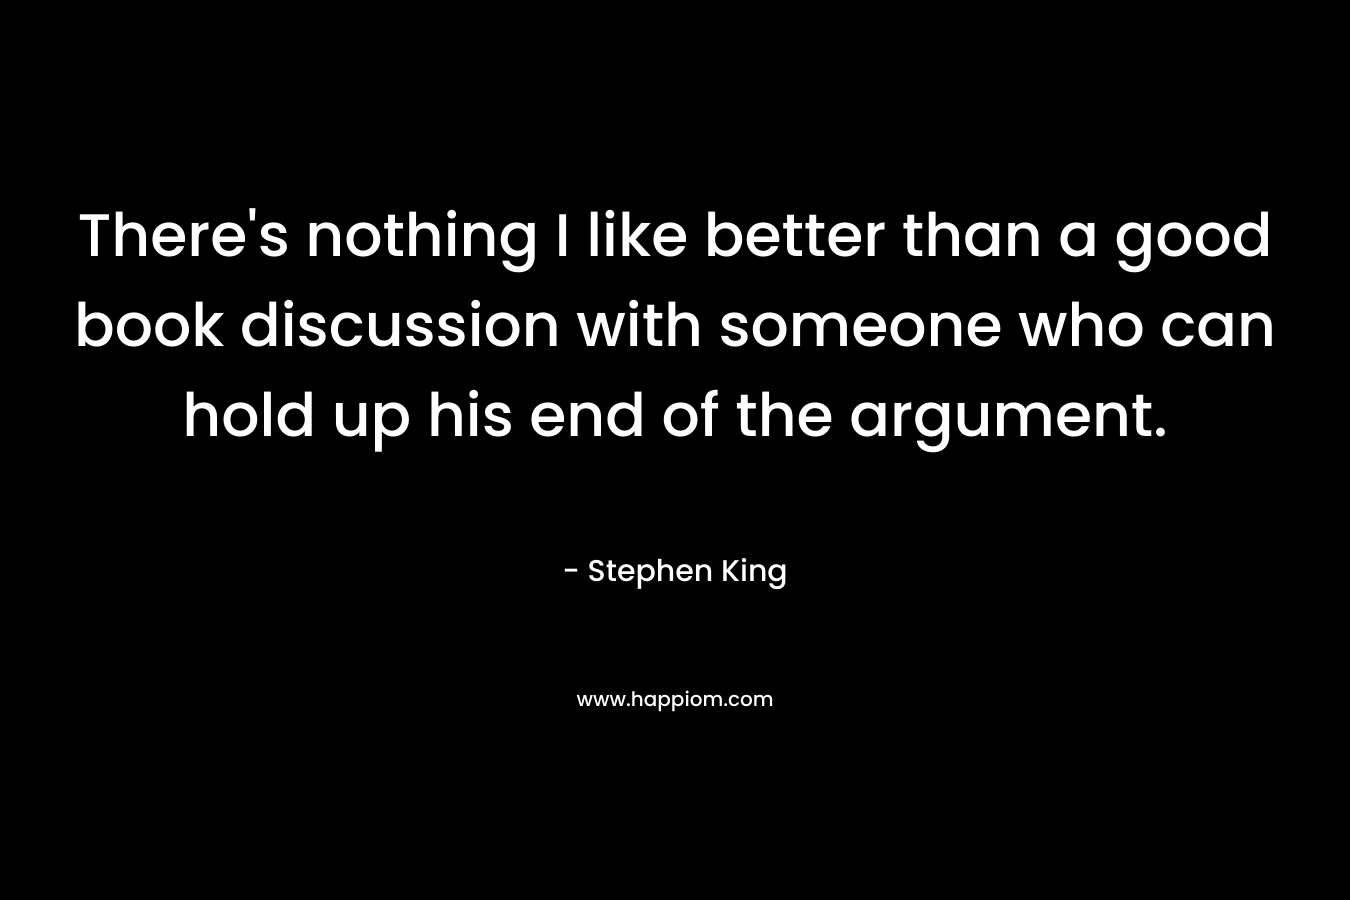 There's nothing I like better than a good book discussion with someone who can hold up his end of the argument.